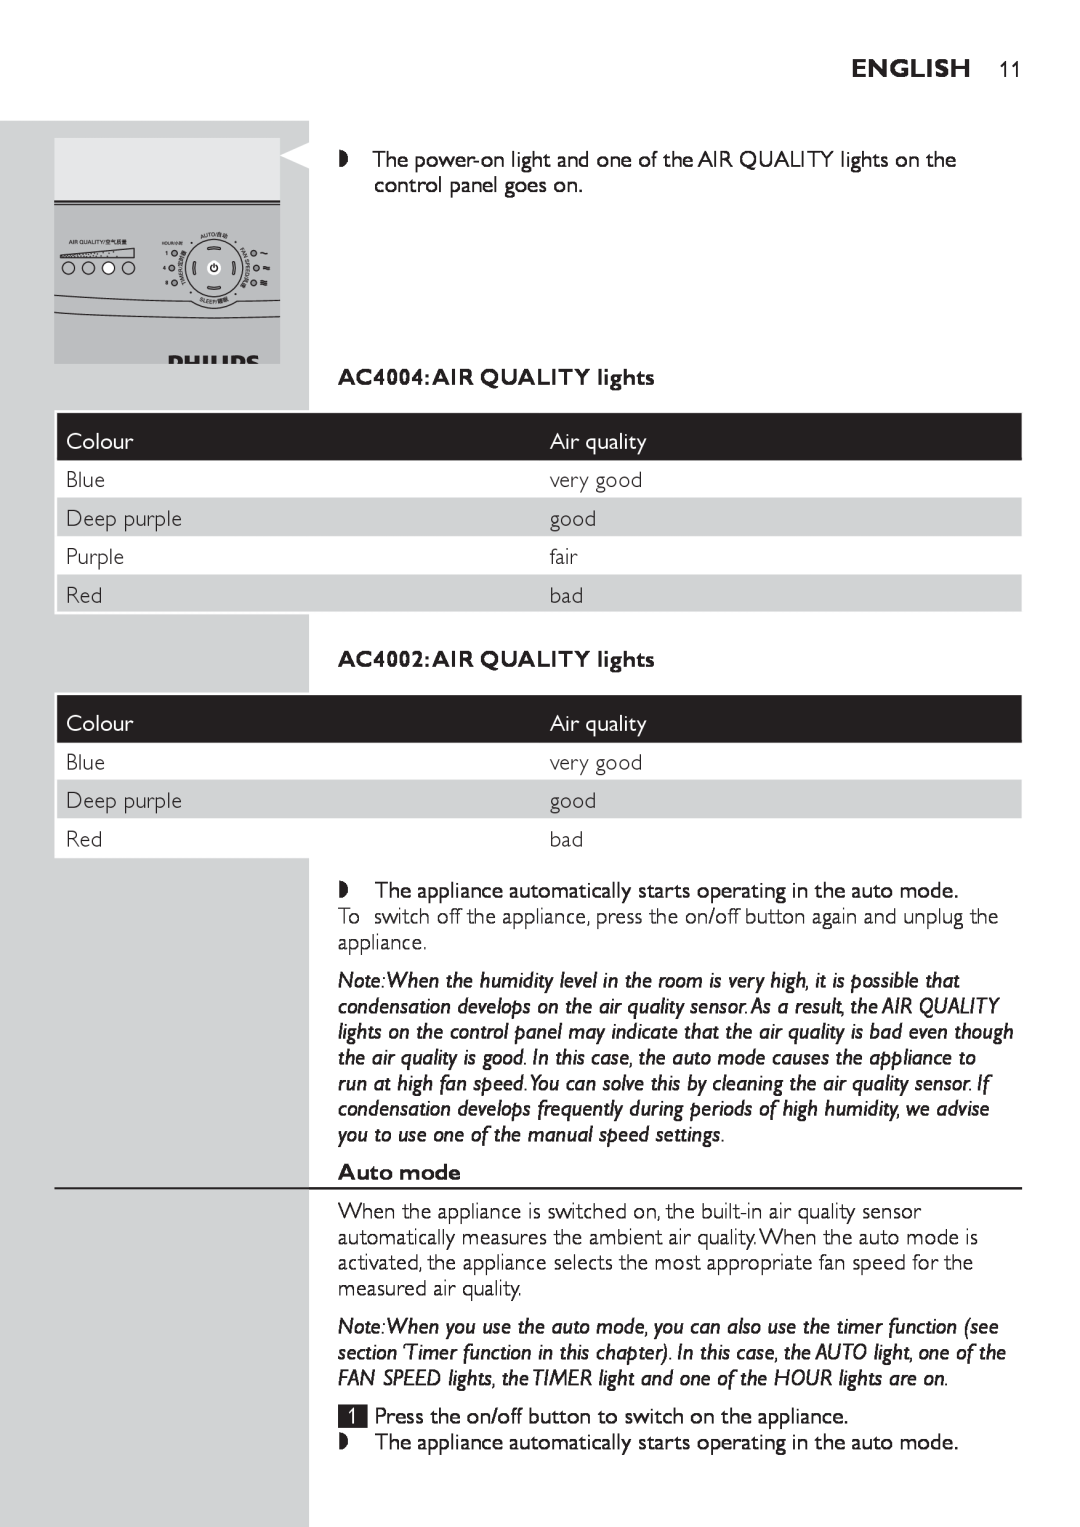 Philips user manual AC4004 AiR QUAliTY lights, Colour, Air quality, AC4002 AiR QUAliTY lights, Auto mode, English 